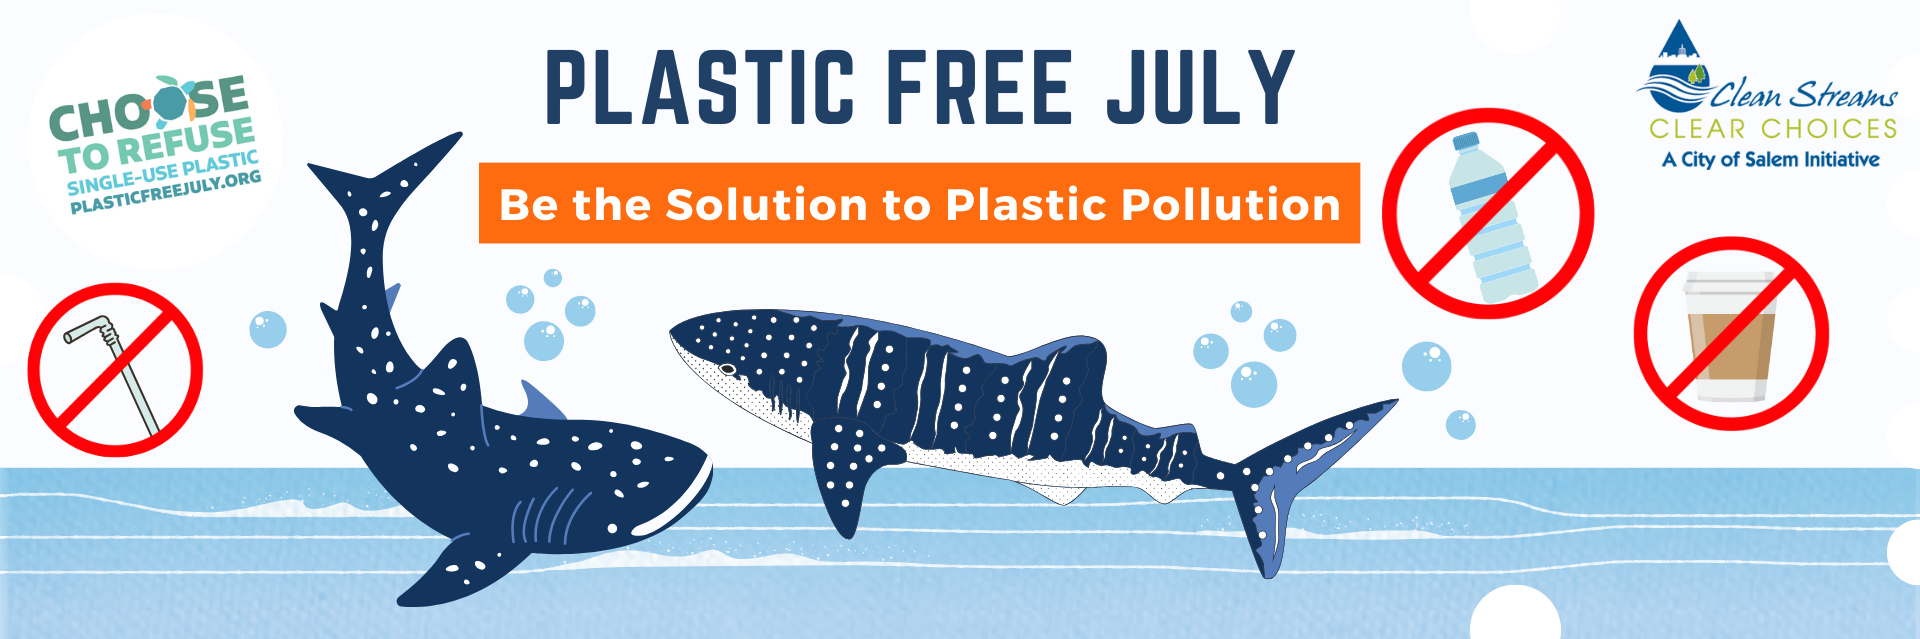 Give Up Single Use Plastic for Plastic Free July